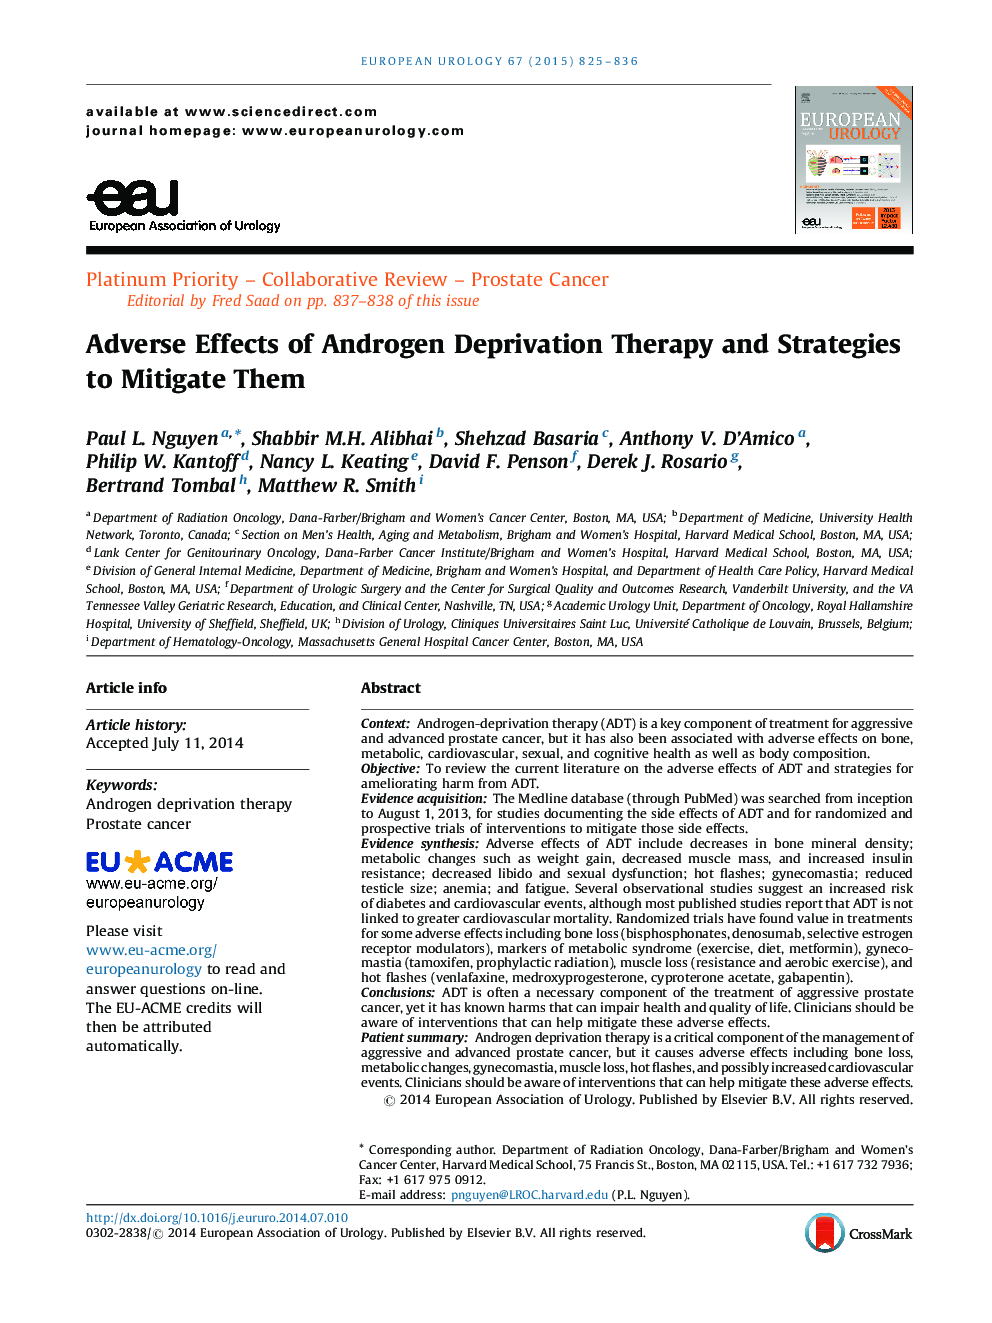 Adverse Effects of Androgen Deprivation Therapy and Strategies to Mitigate Them 